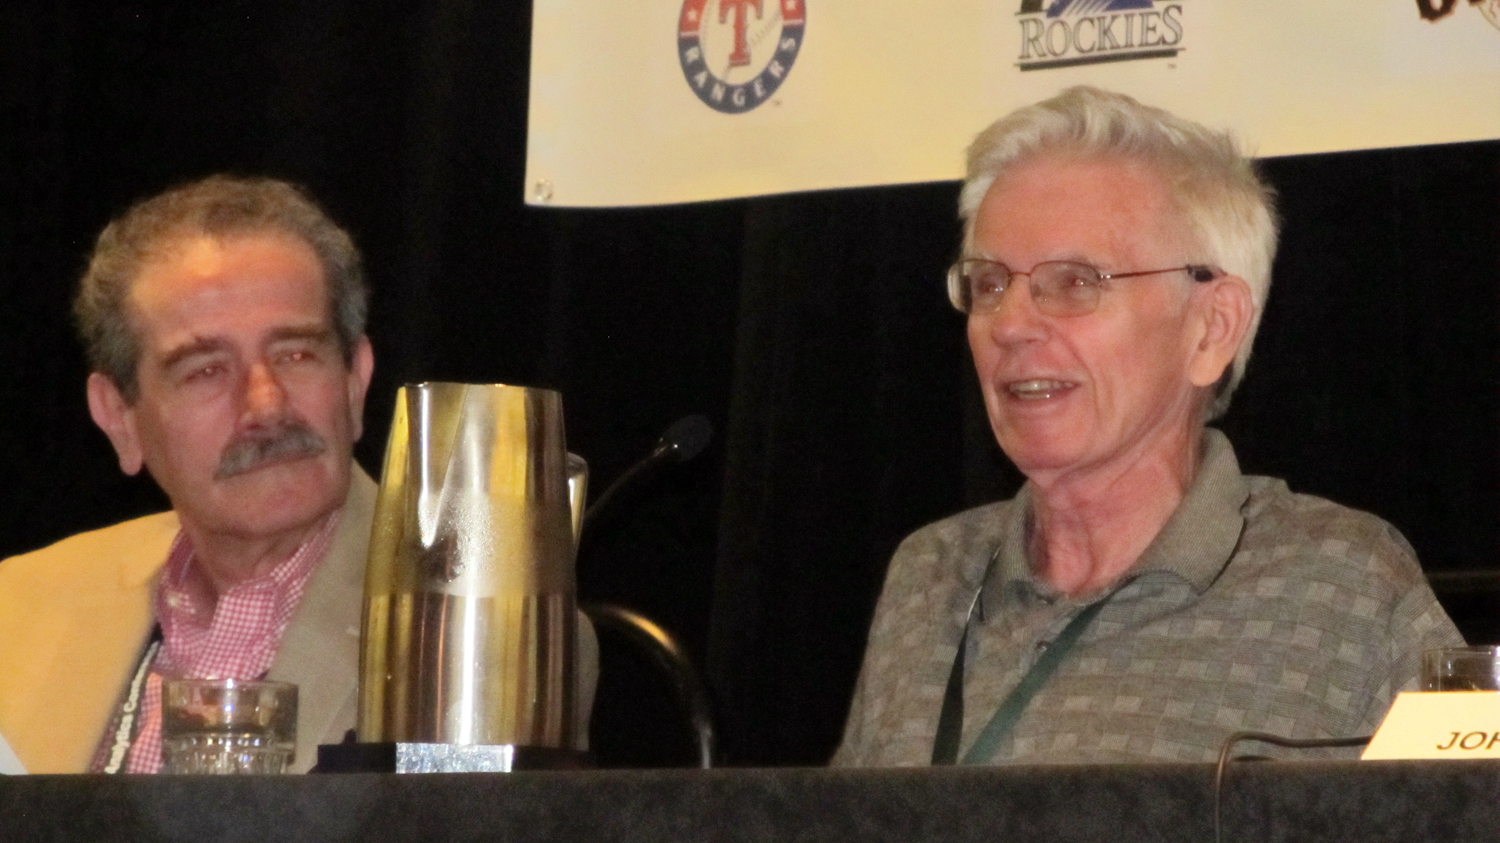 Frequent collaborators were panelists at the 2015 SABR Analytics Conference in Phoenix.